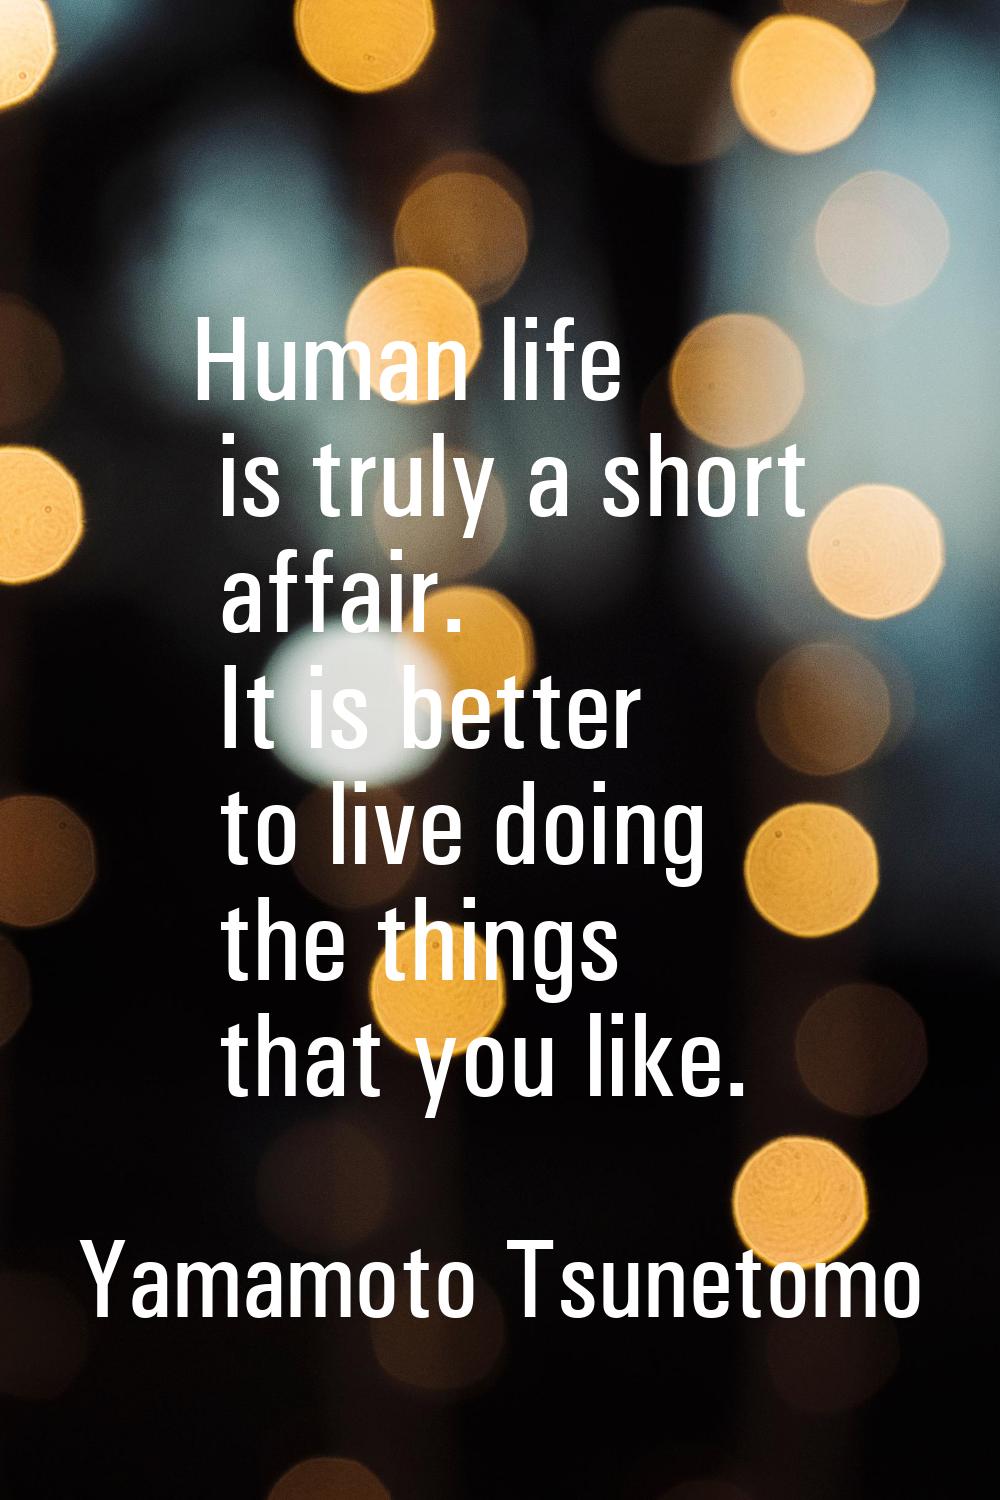 Human life is truly a short affair. It is better to live doing the things that you like.